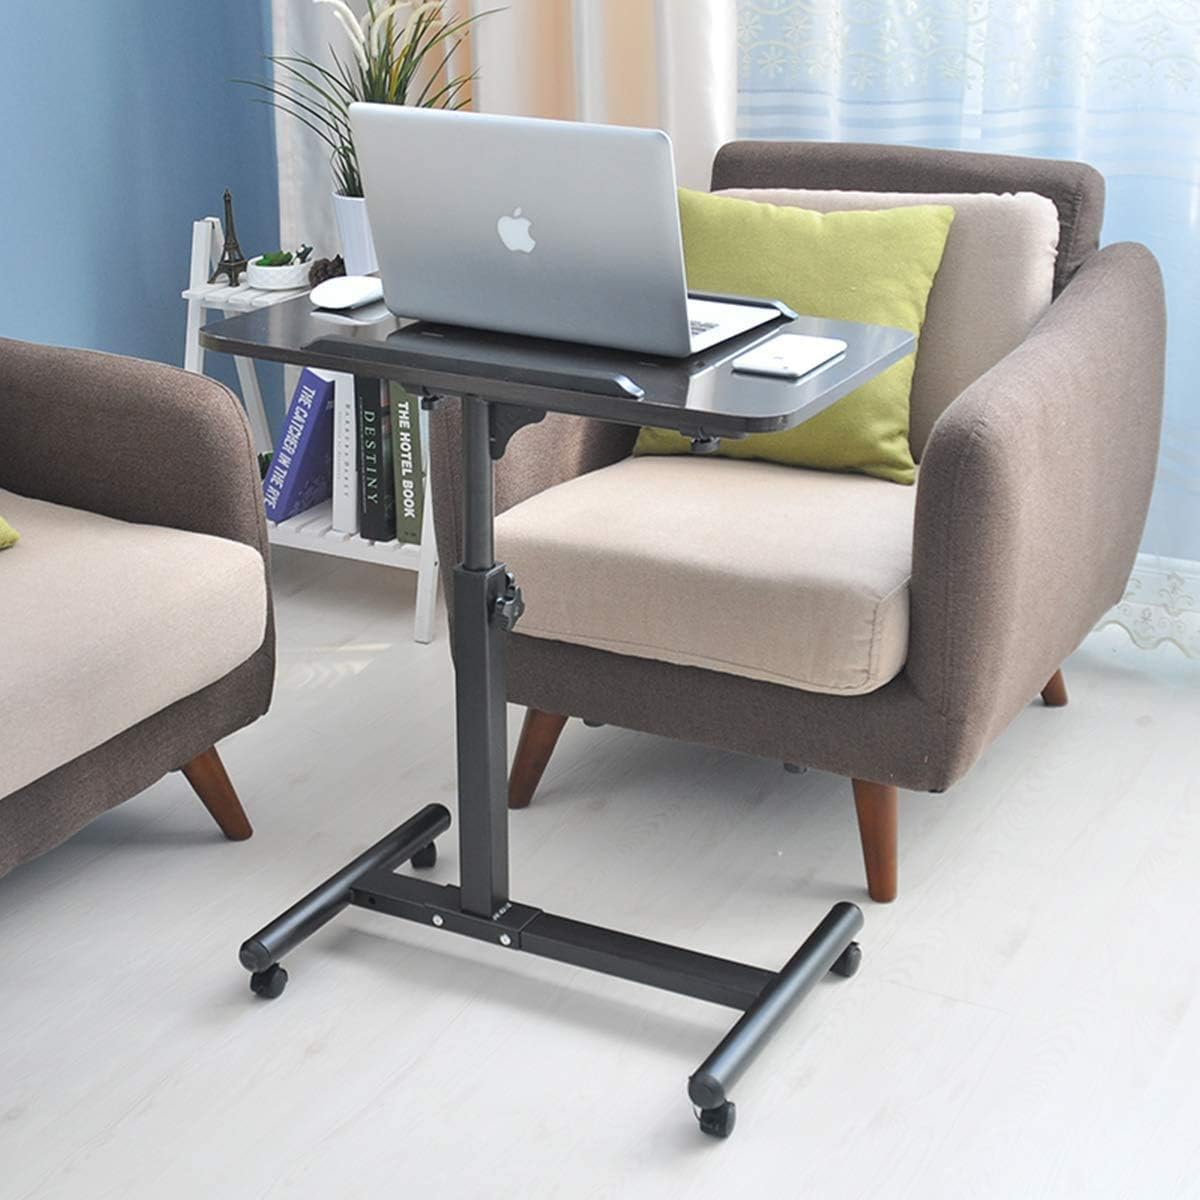 Adjustable Portable Lazy Table Desk Stand Sofa Bed Tray For Laptop Computer Notebook Tablet